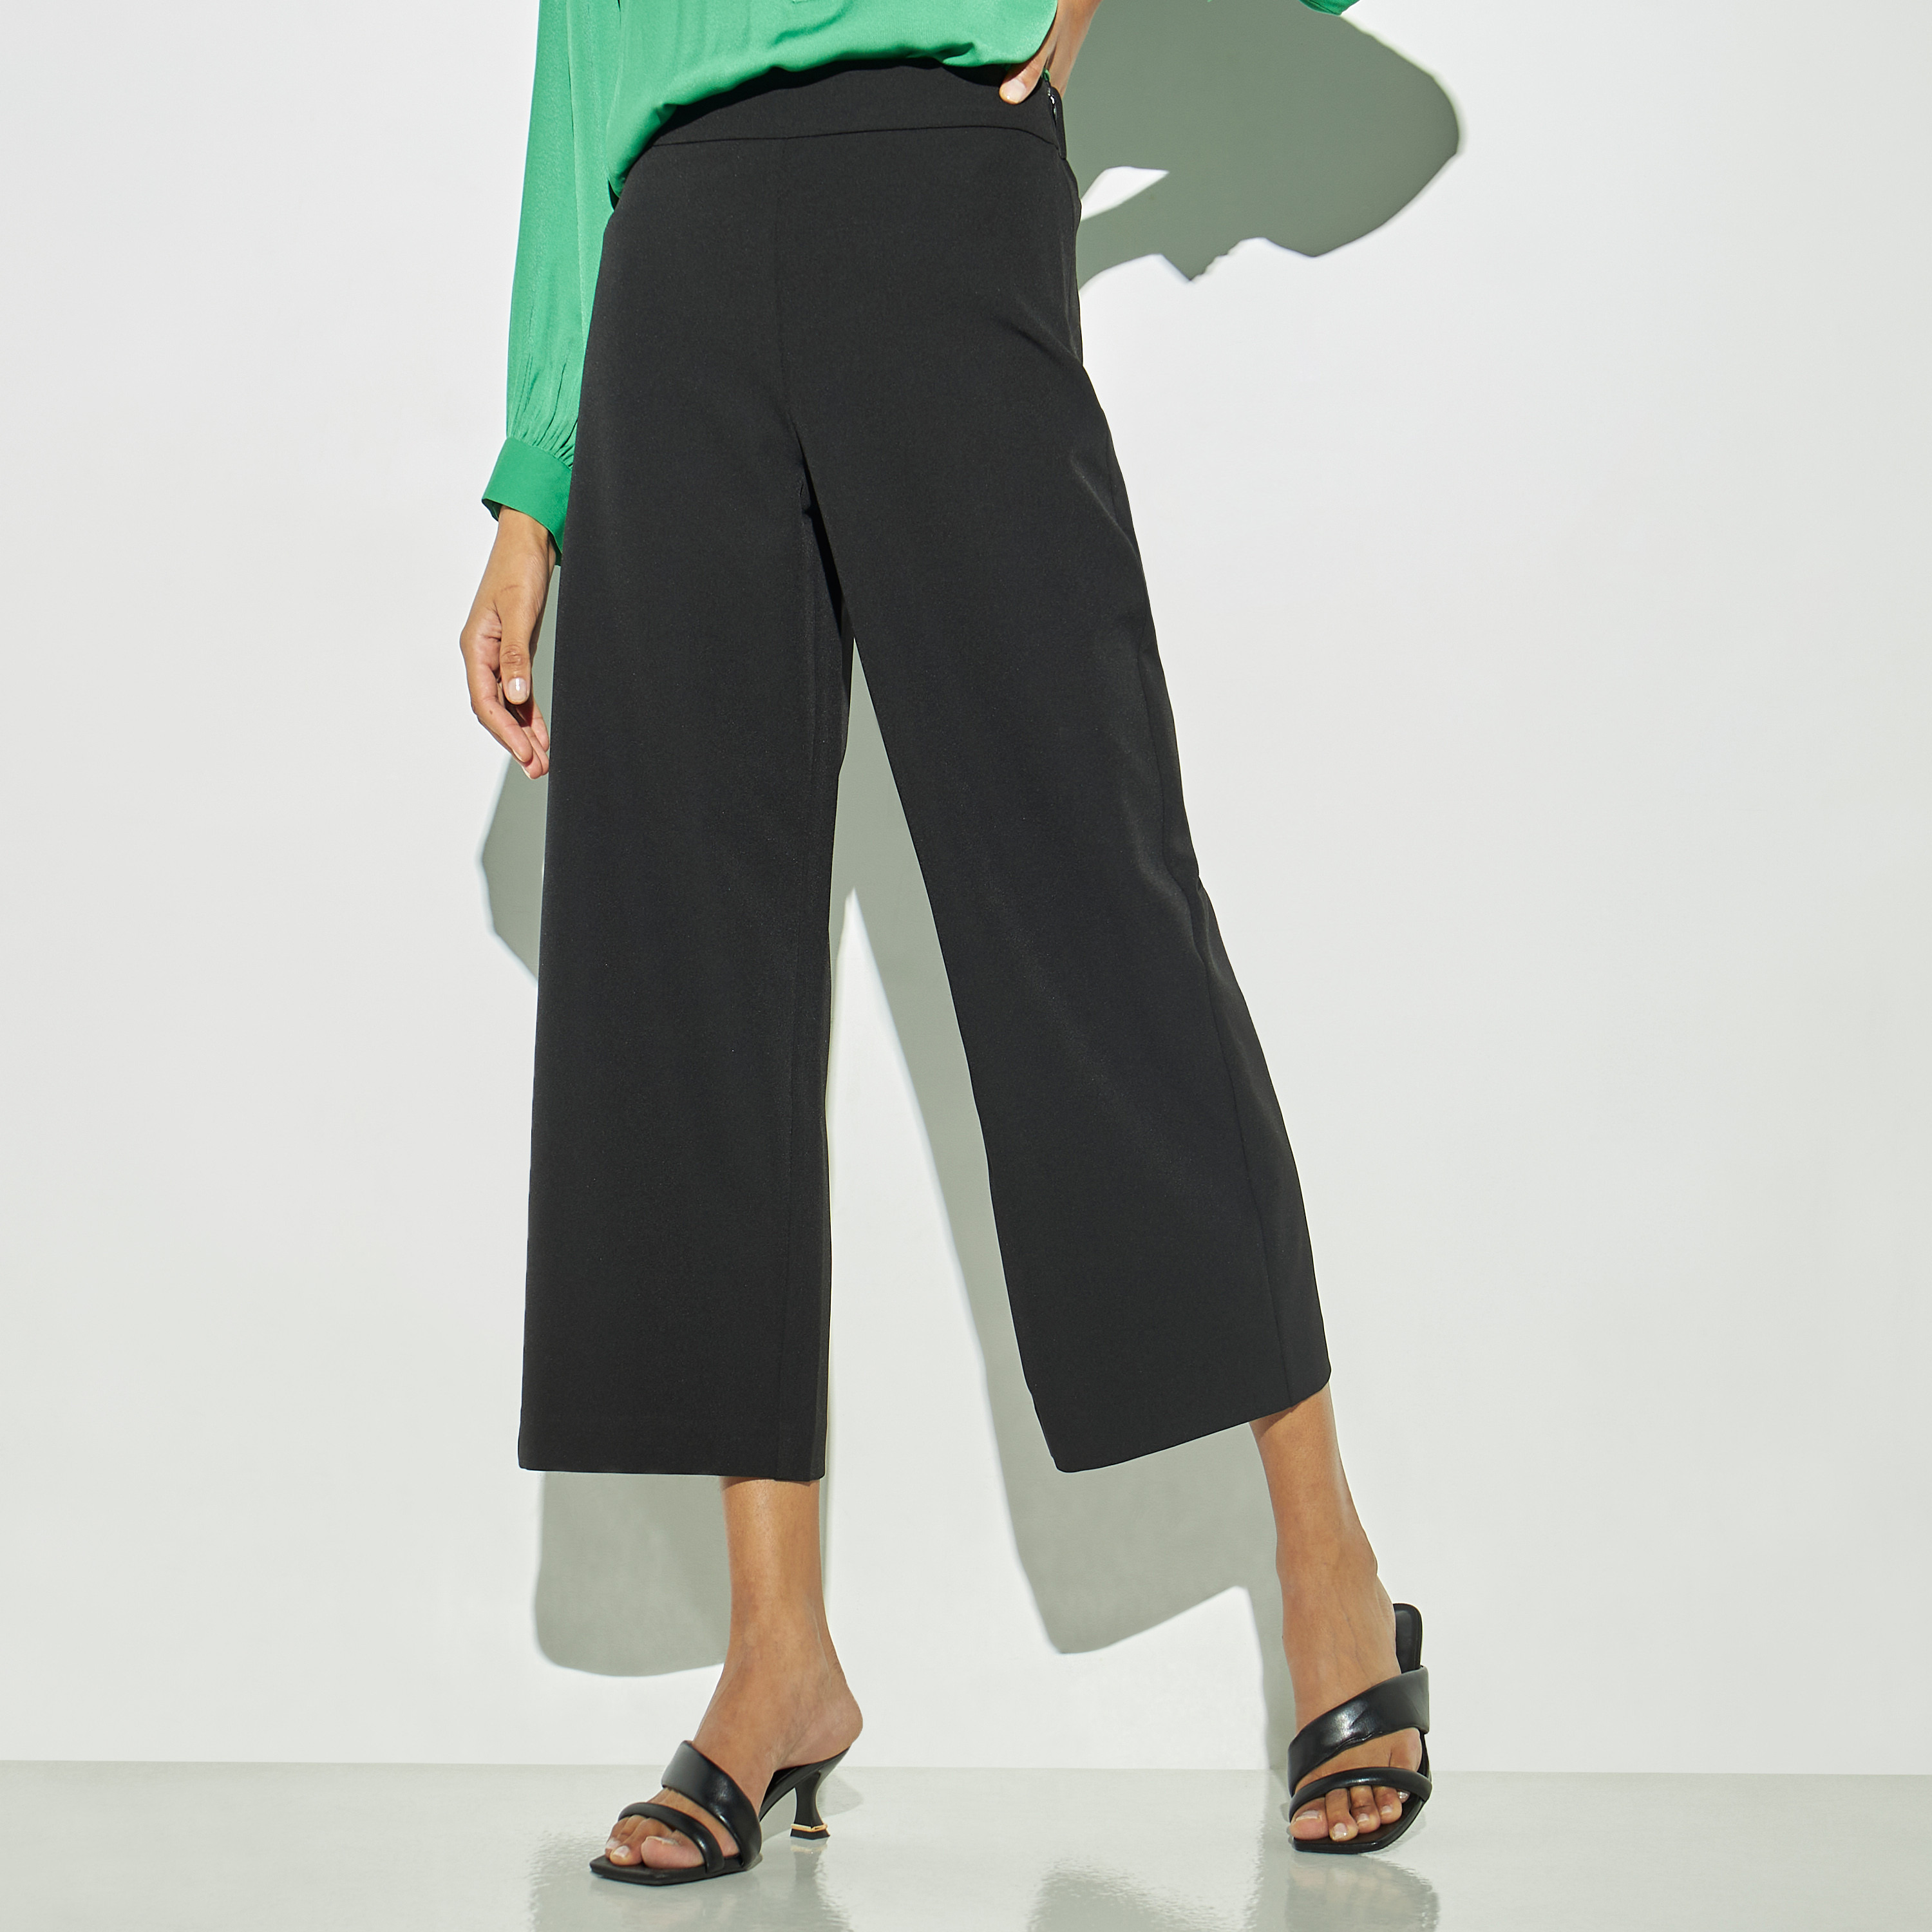 Where to buy culotte pants?